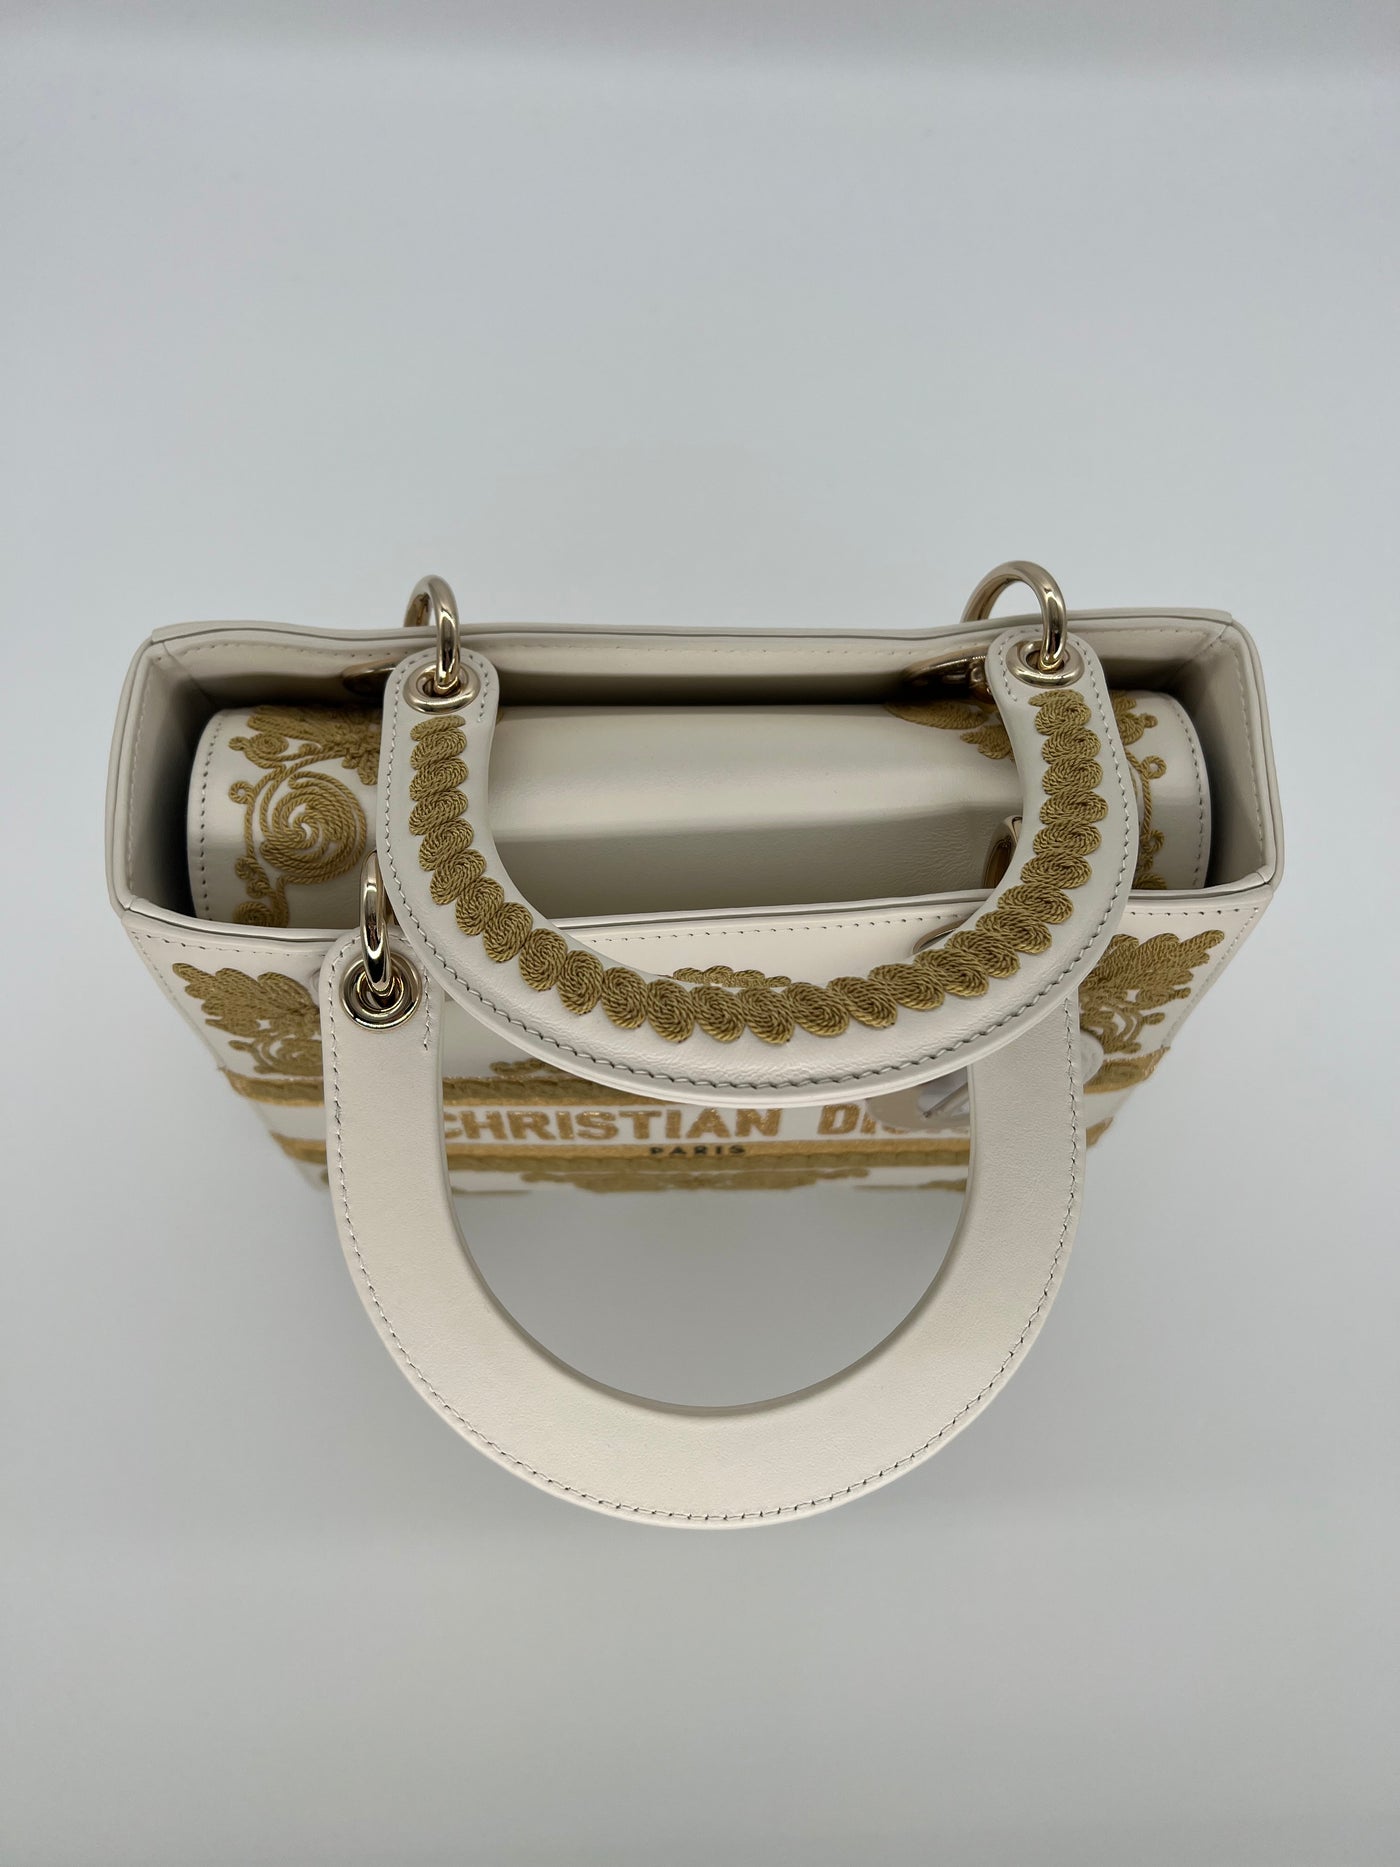 Dior Lady Dior - Medium - Latte Leather with Embroidery